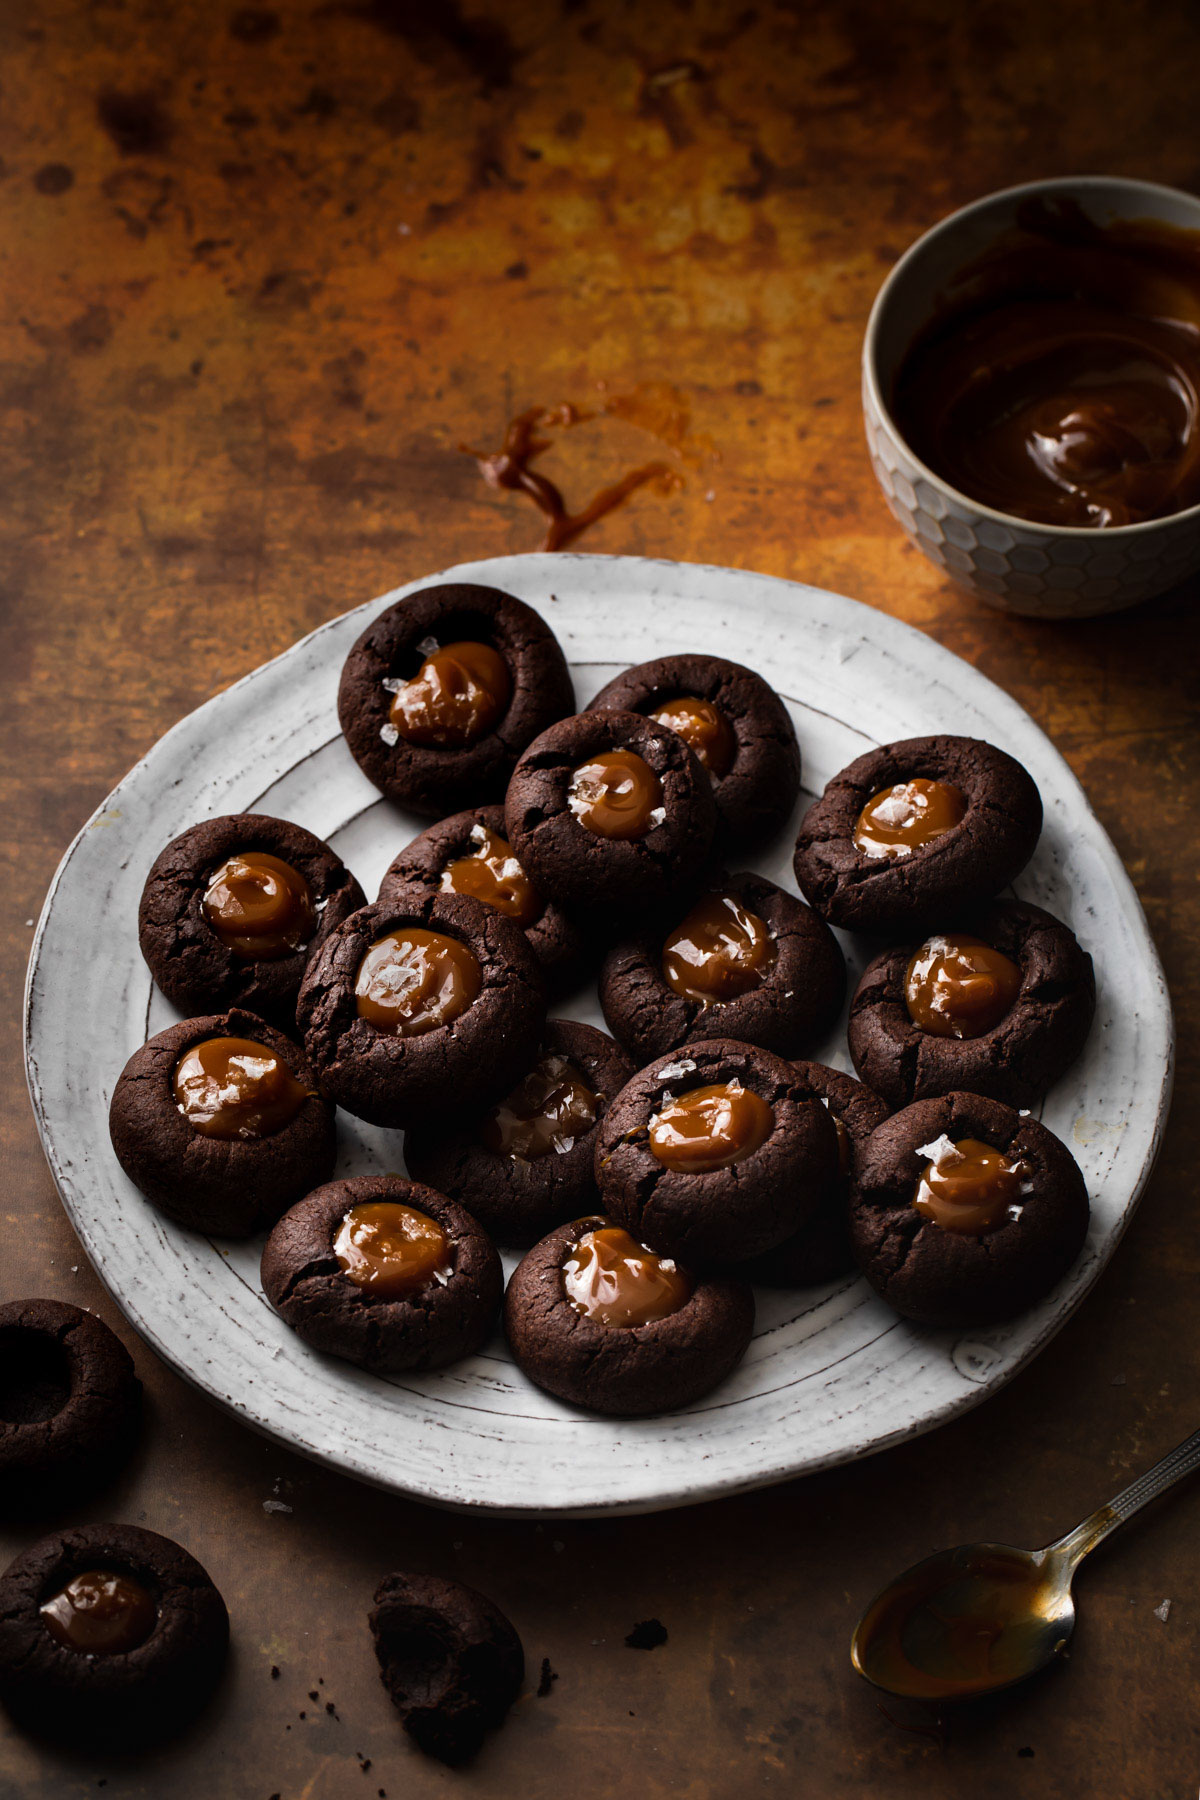 A plate of chocolate gingerbread thumbnail cookies with dulce de leche centers set on a gold backdrop